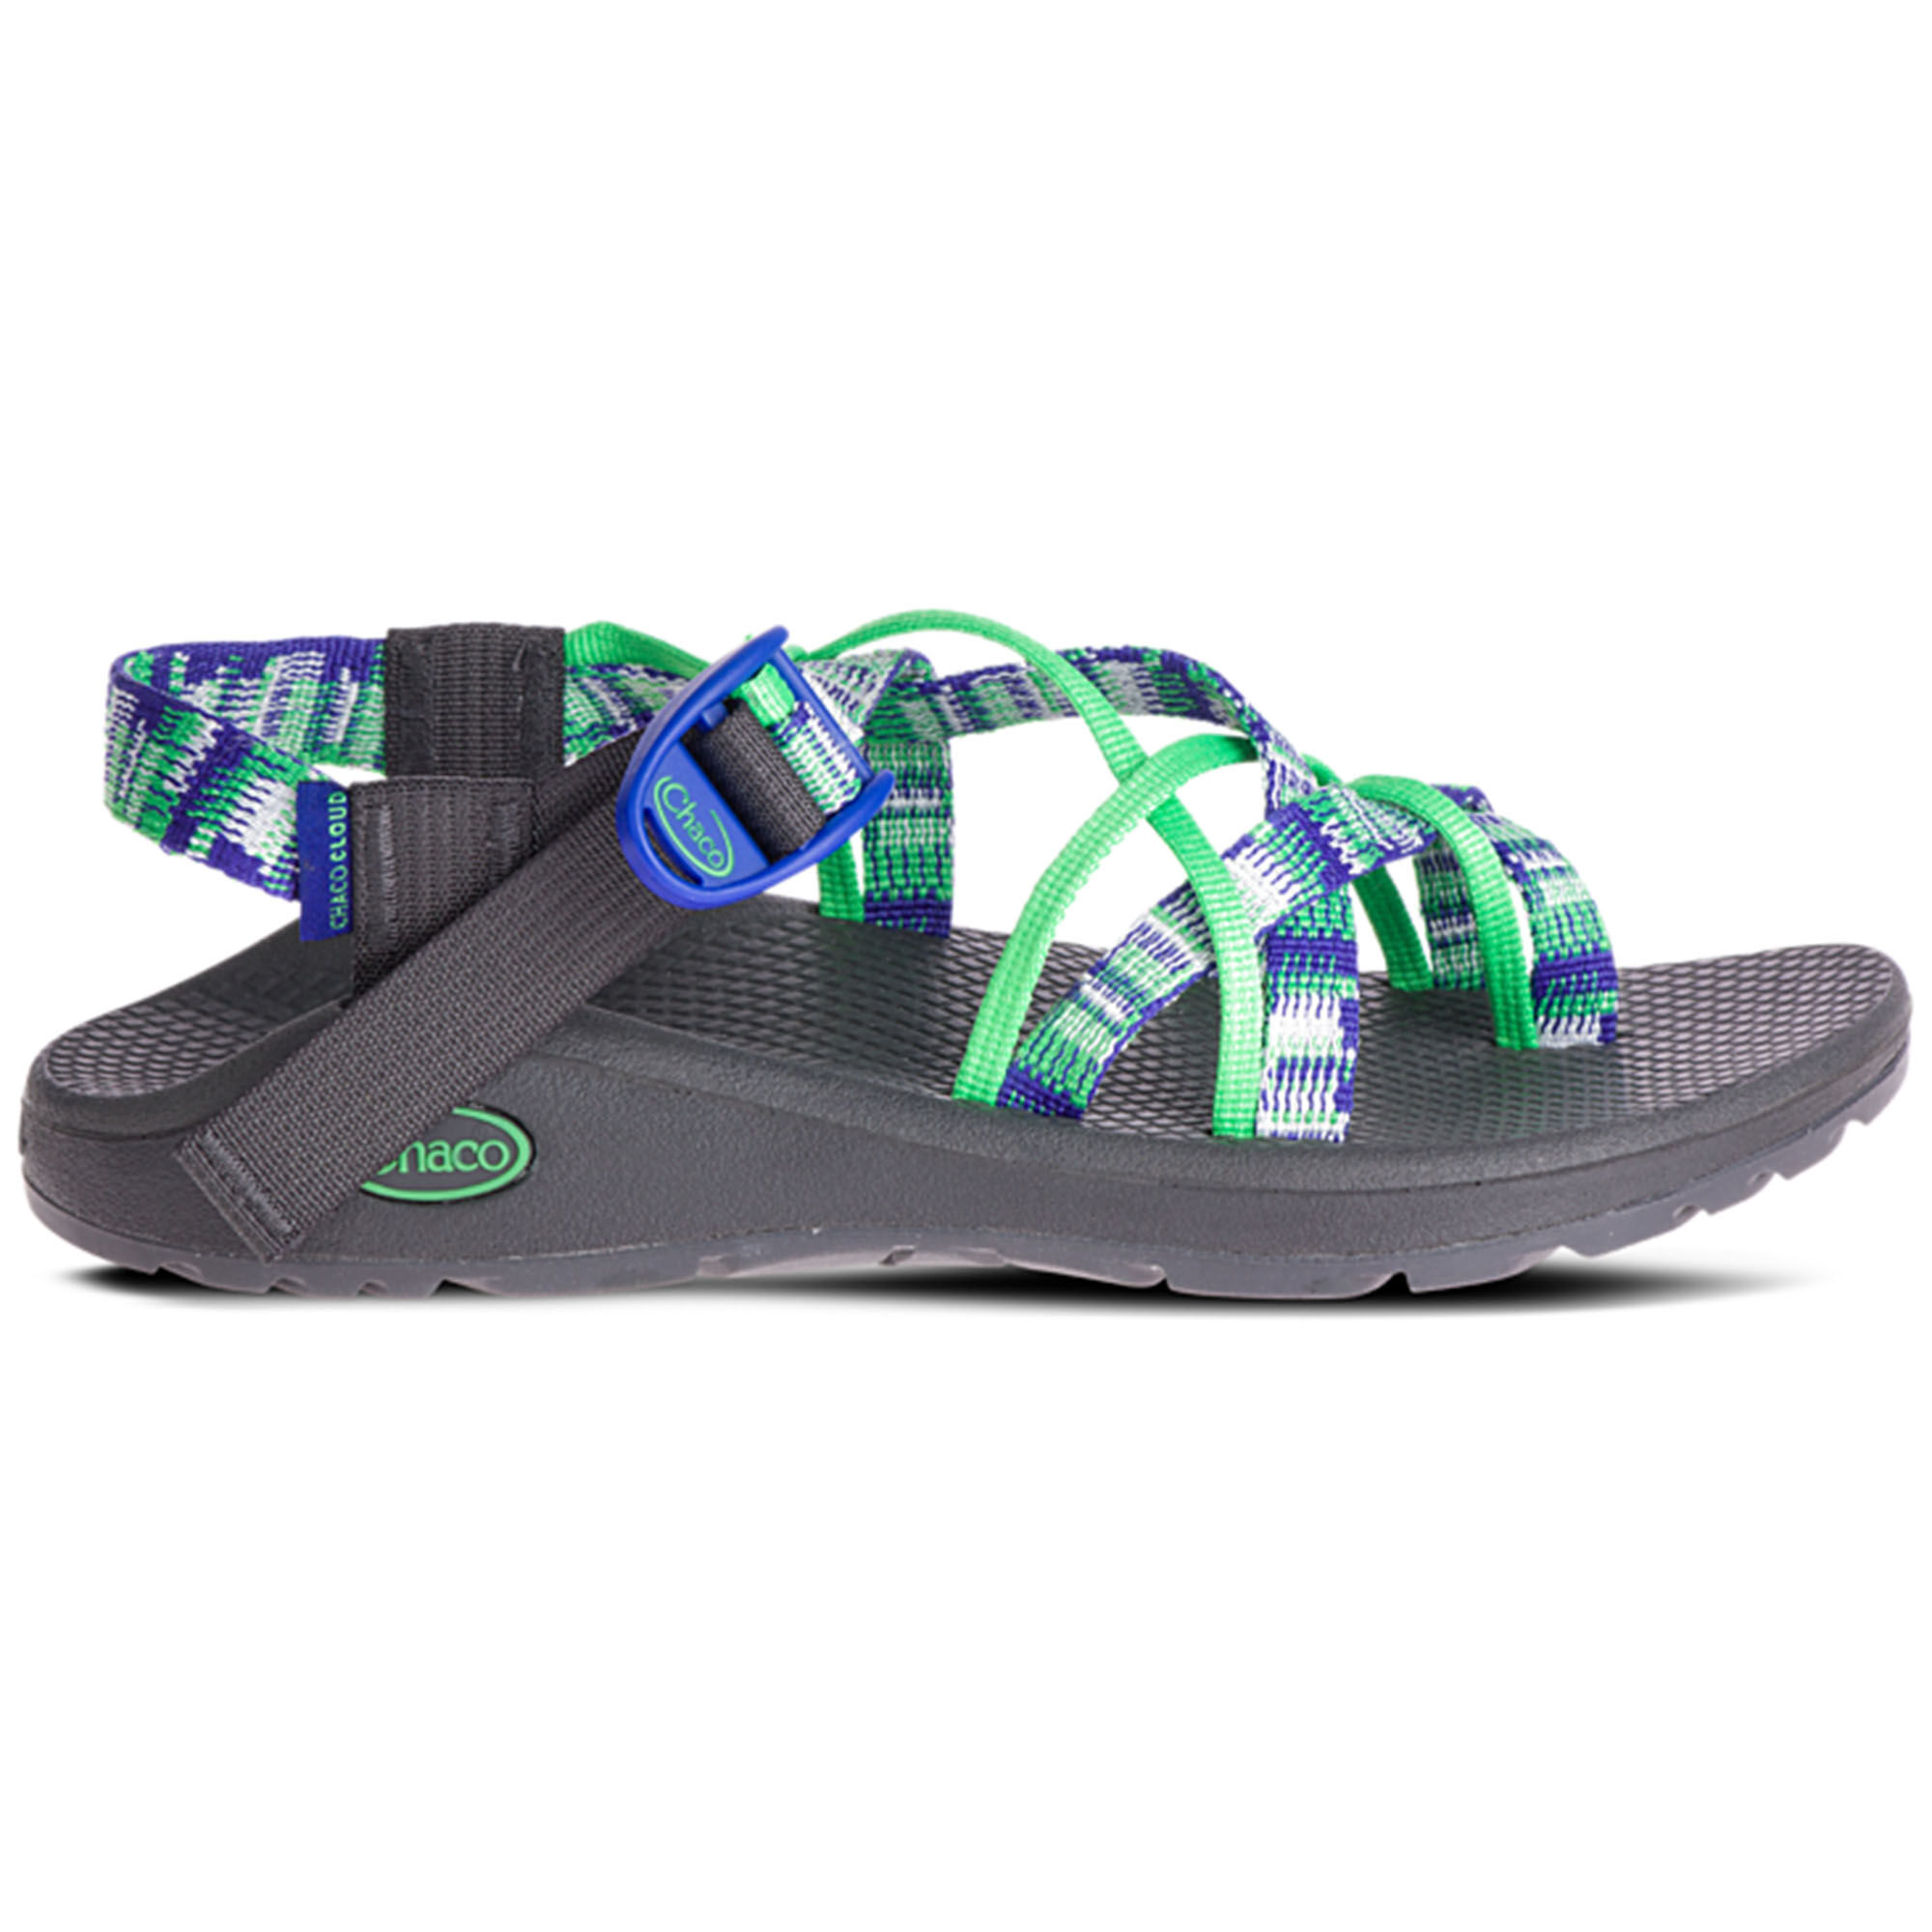 sunflower chacos